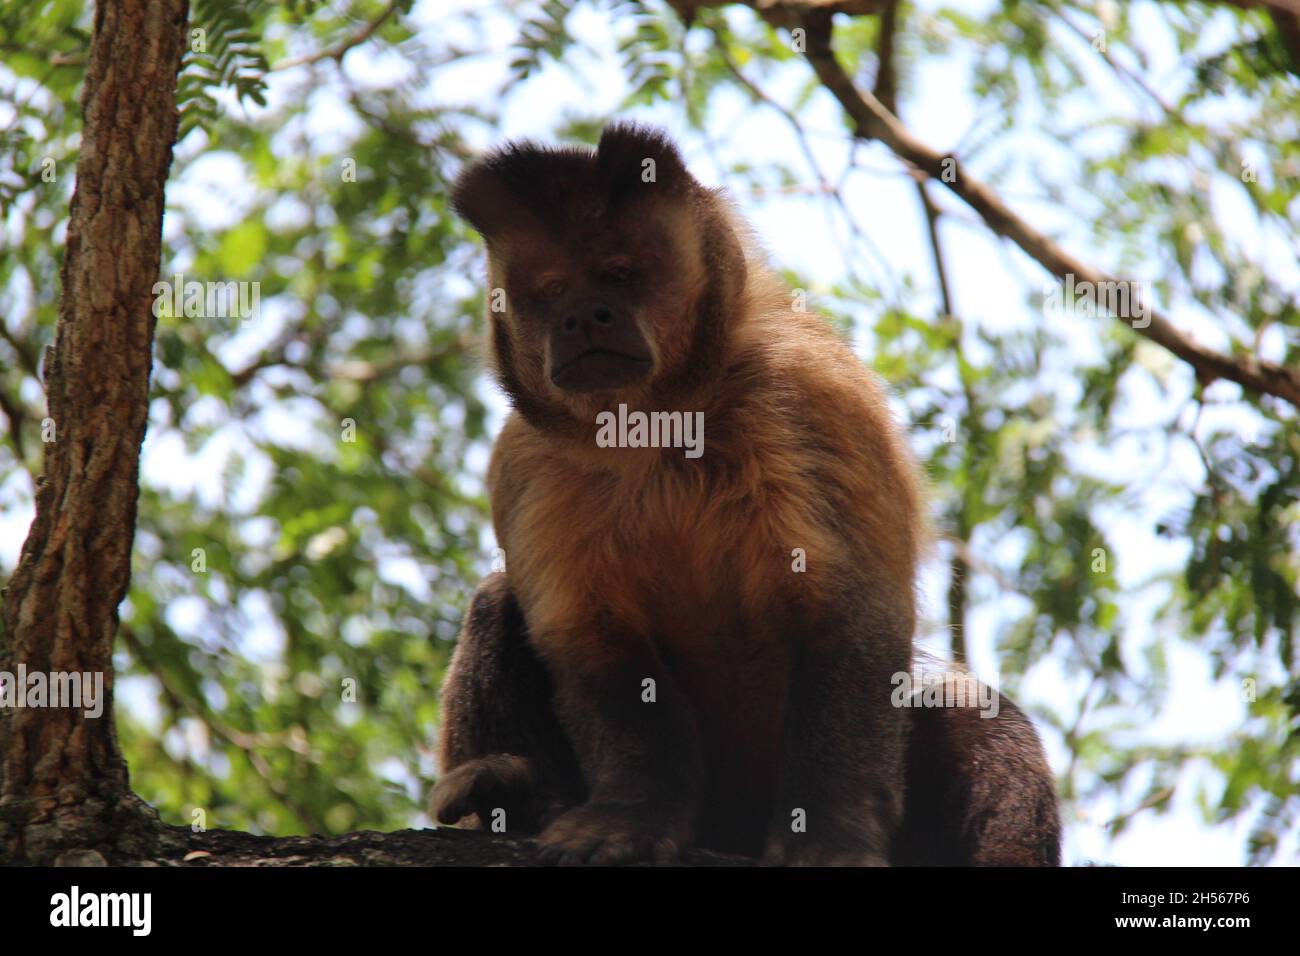 Monkey sitting on a tree trunk looking at the photographic camera with blurred background. Bonito - Mato Grosso do Sul - Brazil. Stock Photo